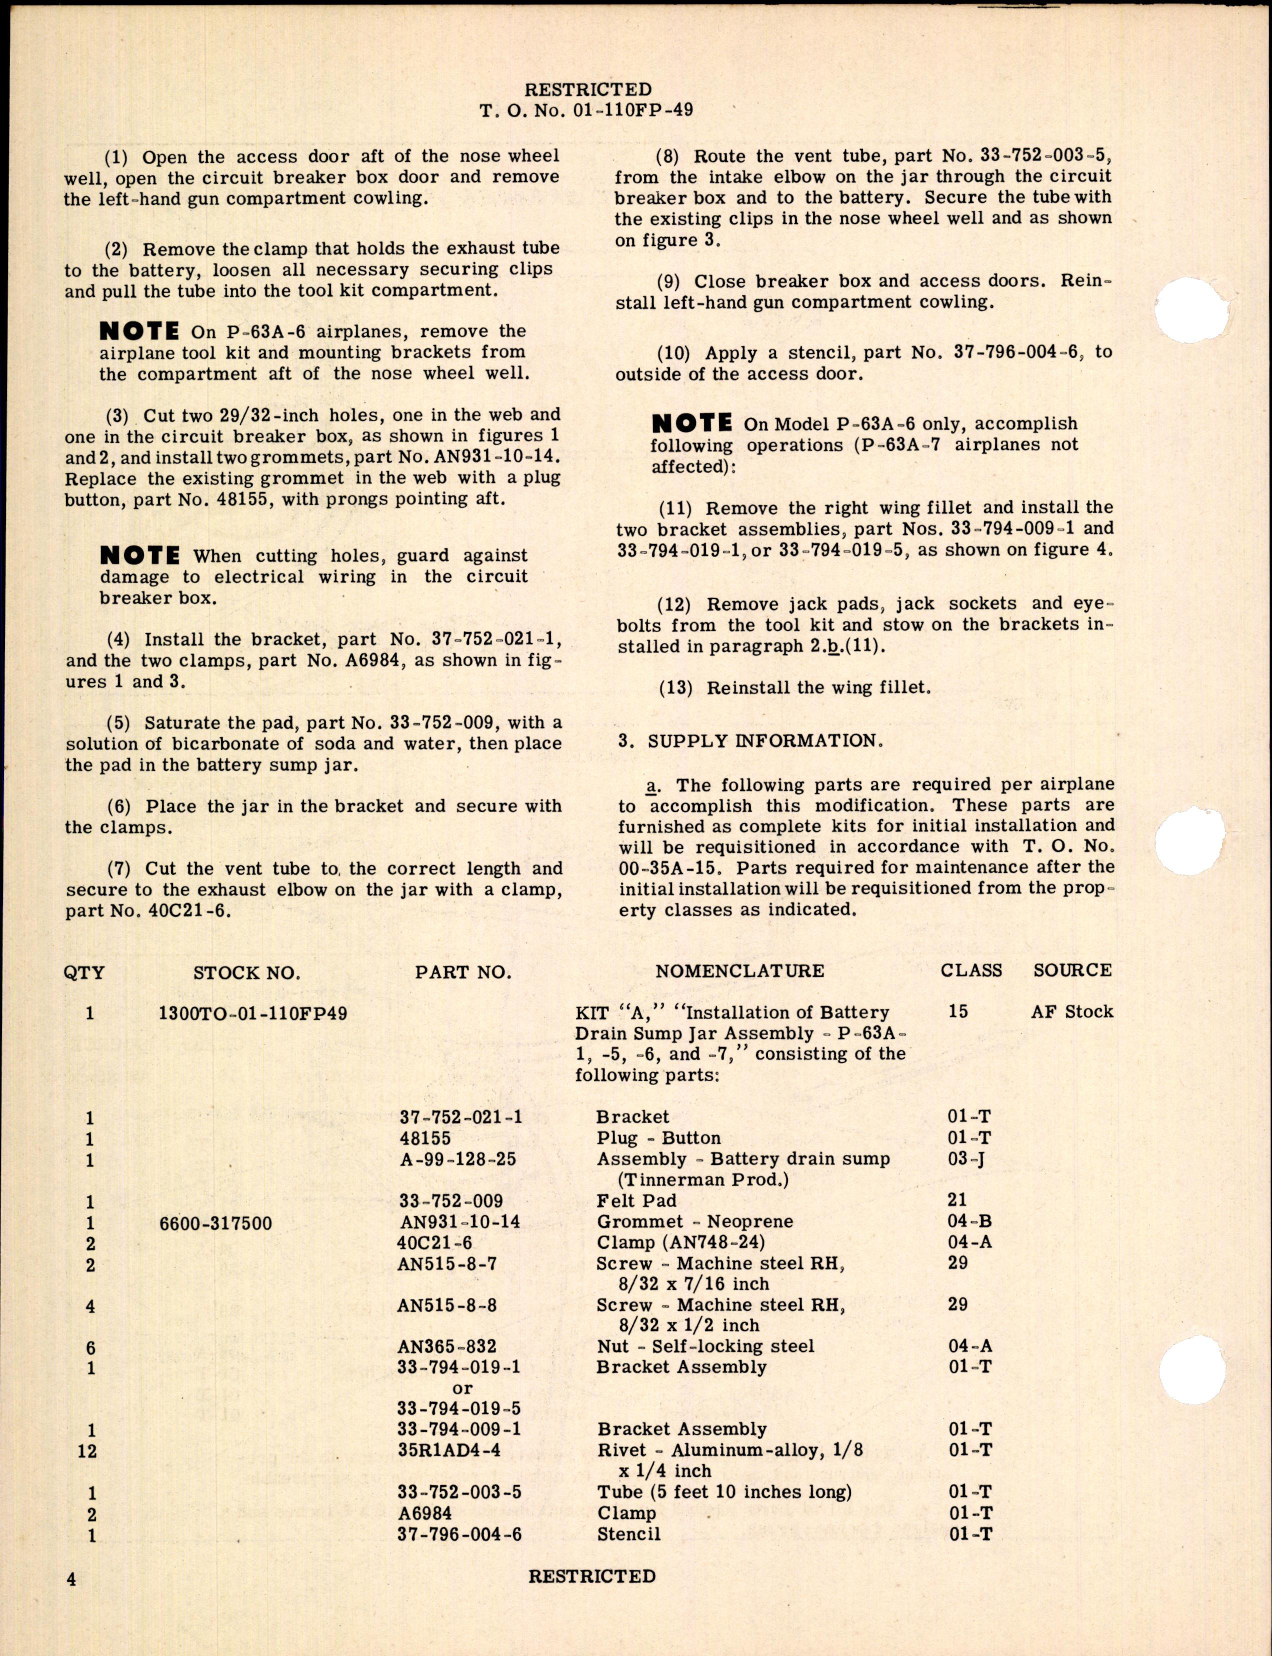 Sample page 4 from AirCorps Library document: Installation of Battery Drain Sump Jar Assembly for P-63A